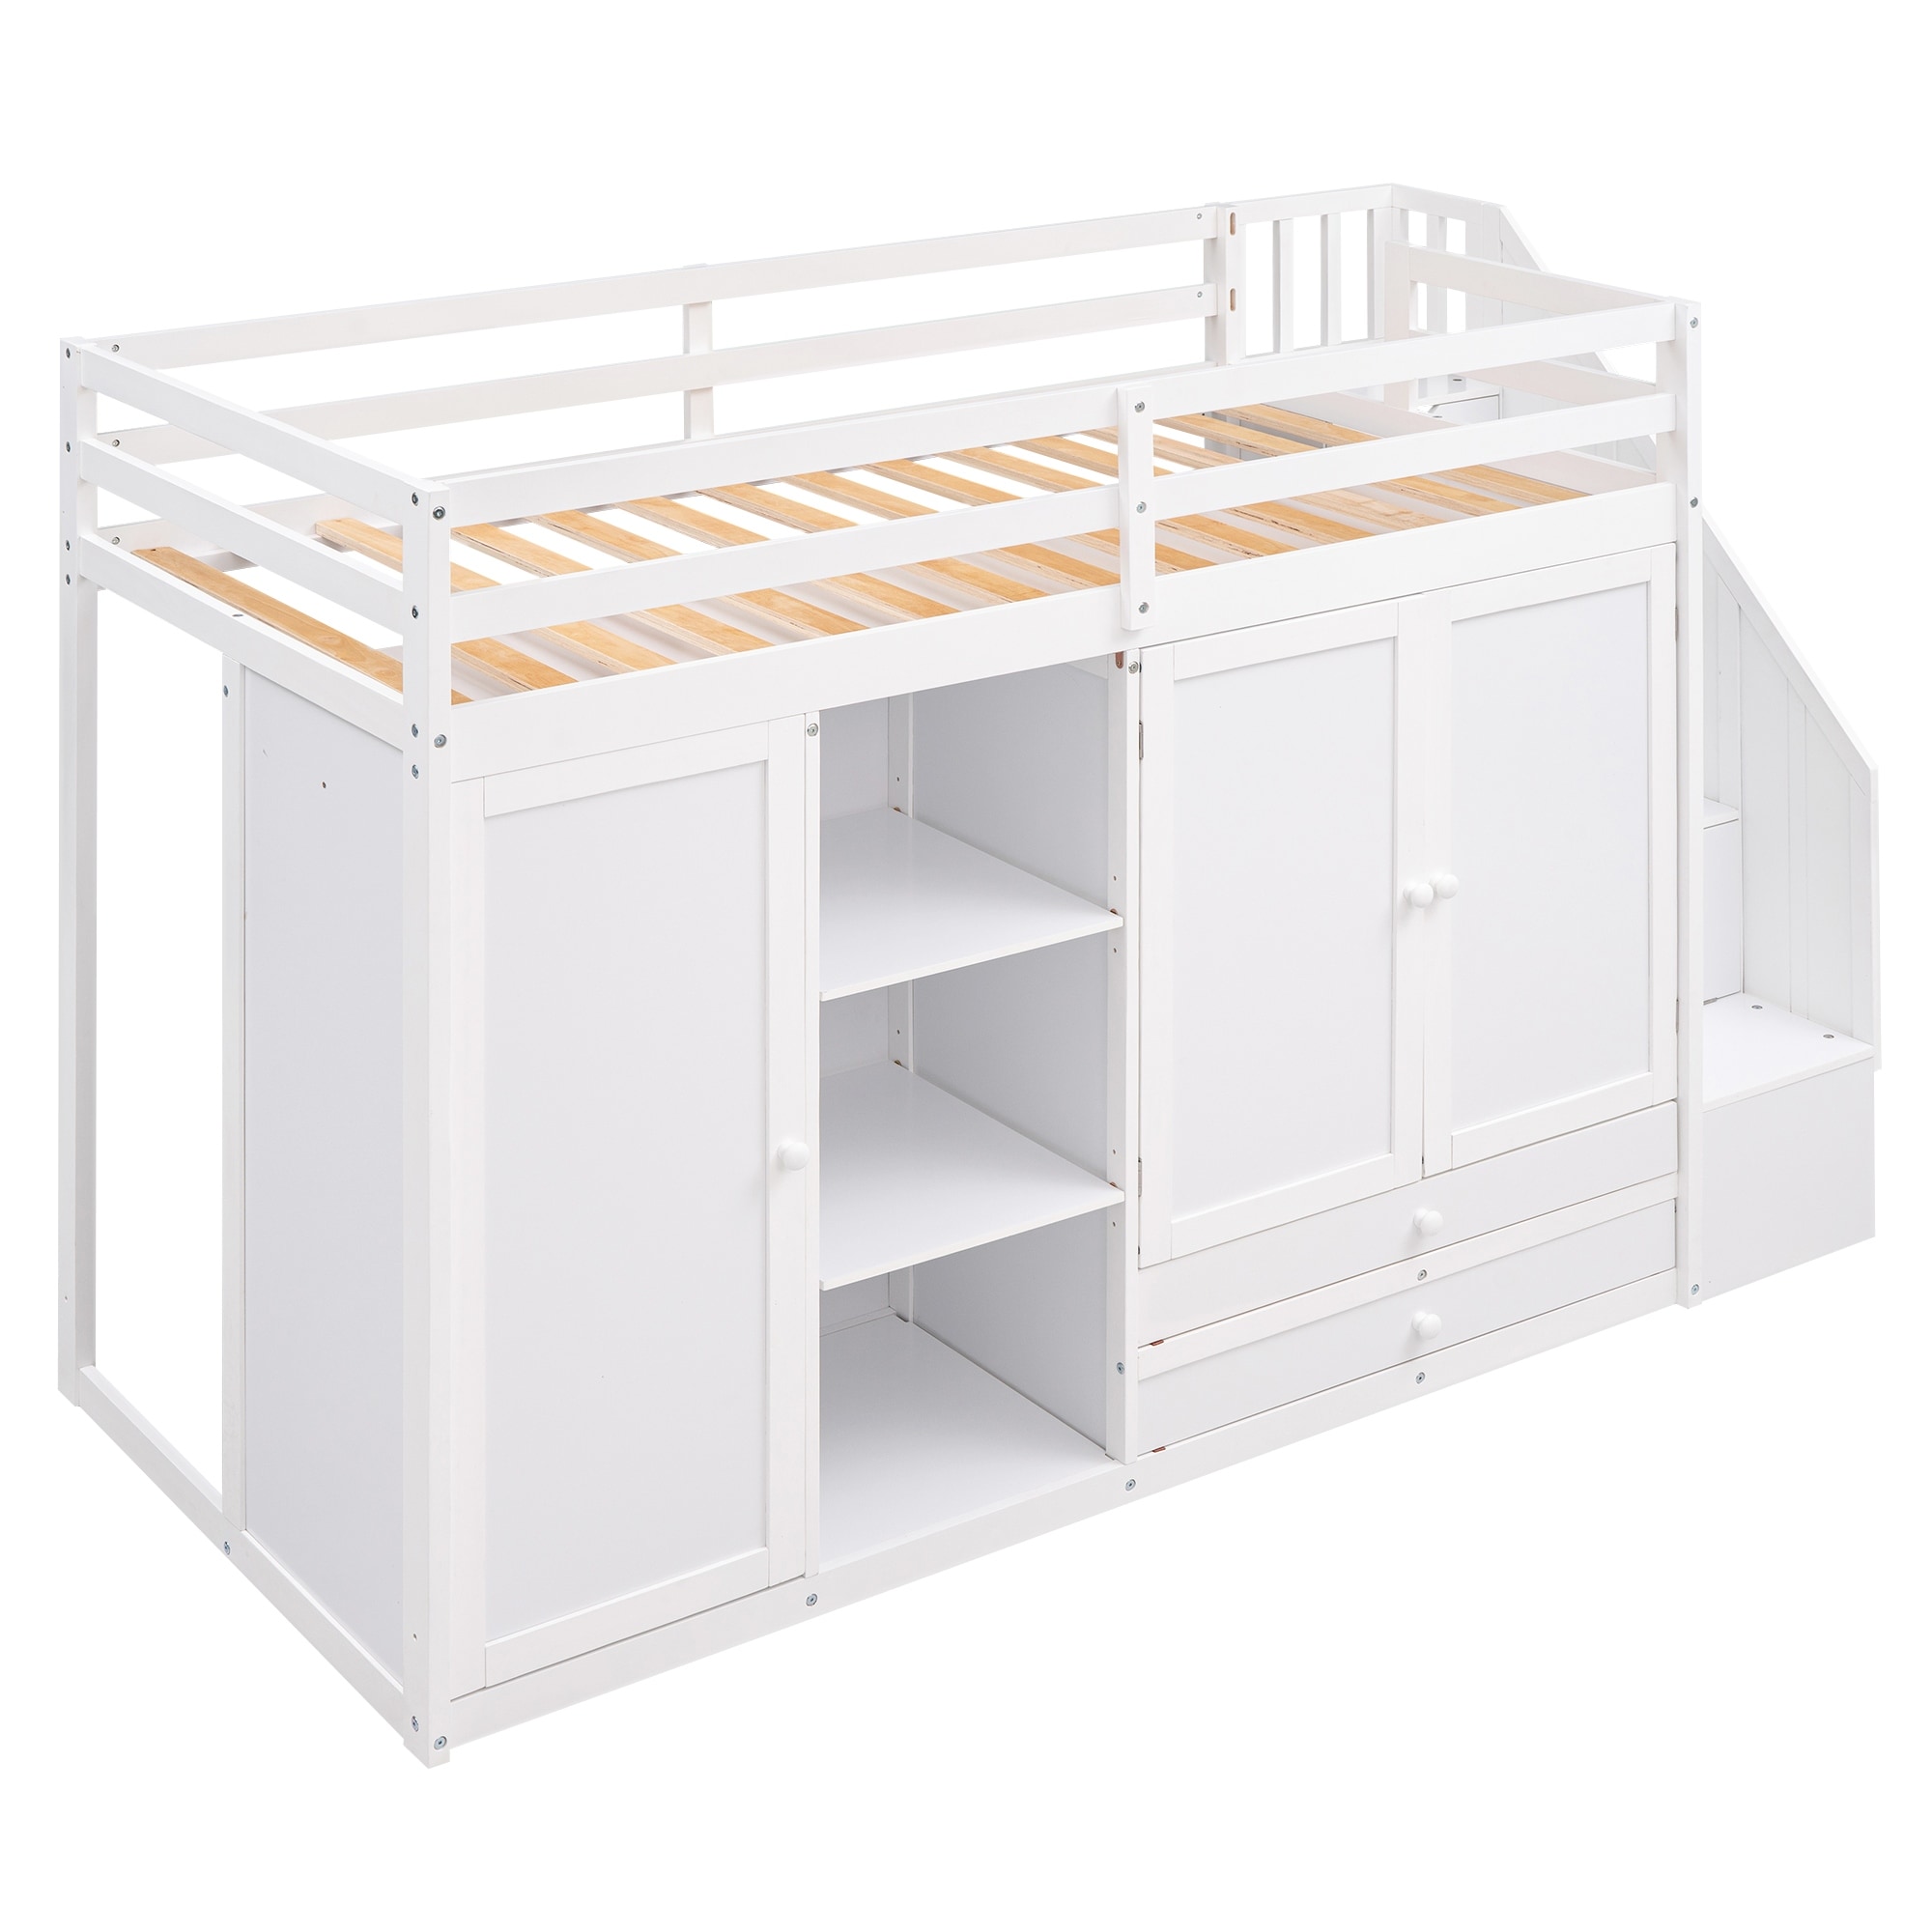 Functional Loft Bed with 3 Shelves and 2 Wardrobes & 2 Drawers, Ladder with Storage